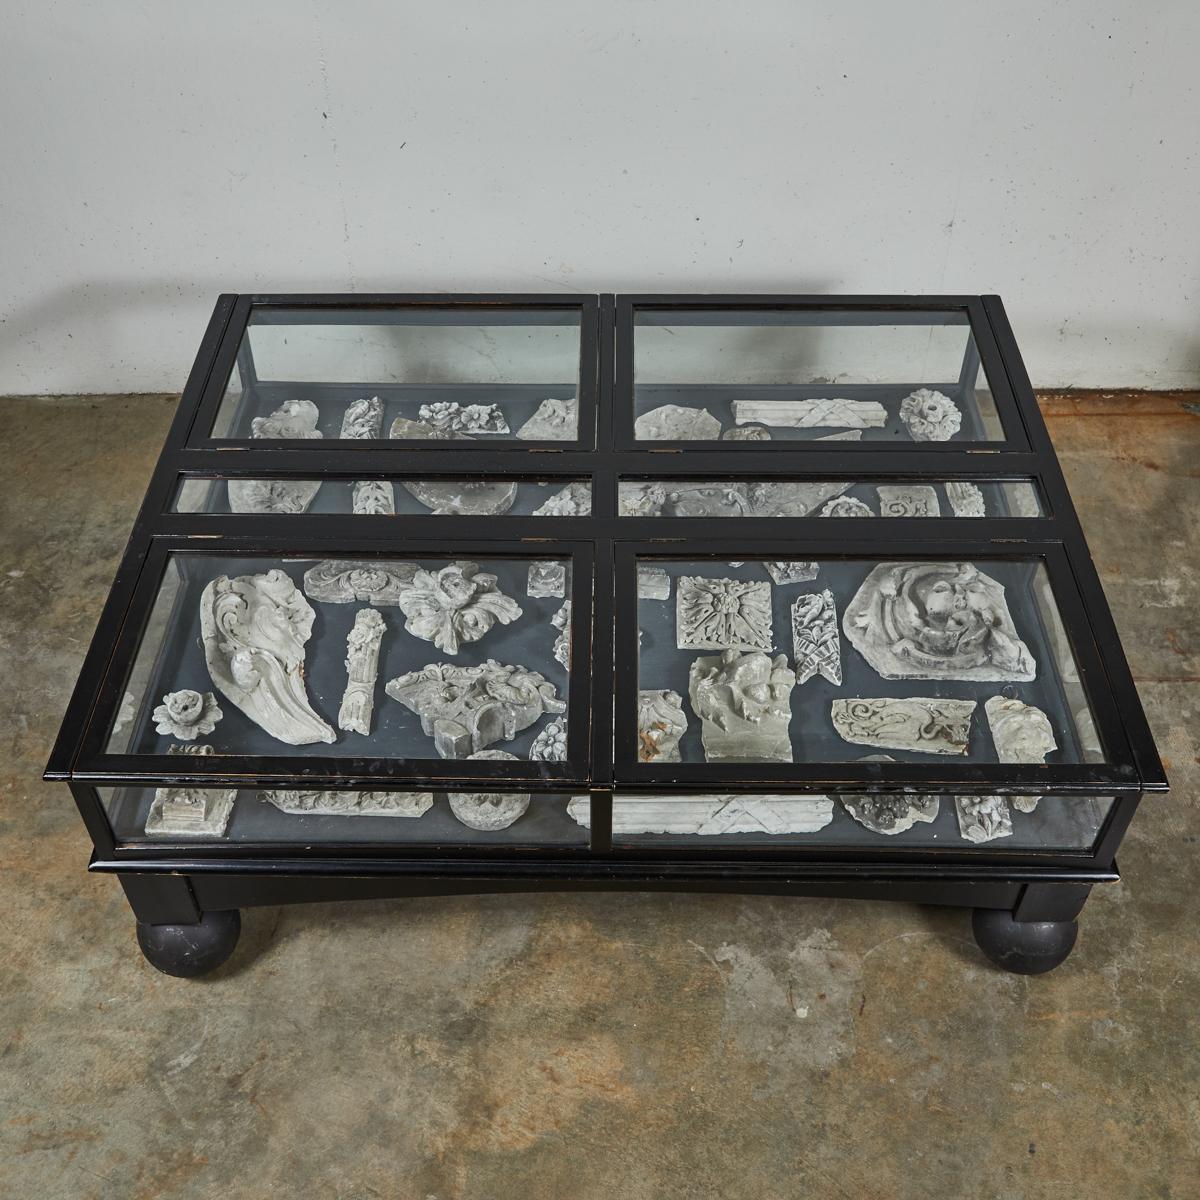 Late 19th-century English glass display case table with round ball feet. A compelling conversation piece, this display case--perfect in size for use as a coffee table--features black wood trim and a gray interior. Ideal for displaying your own